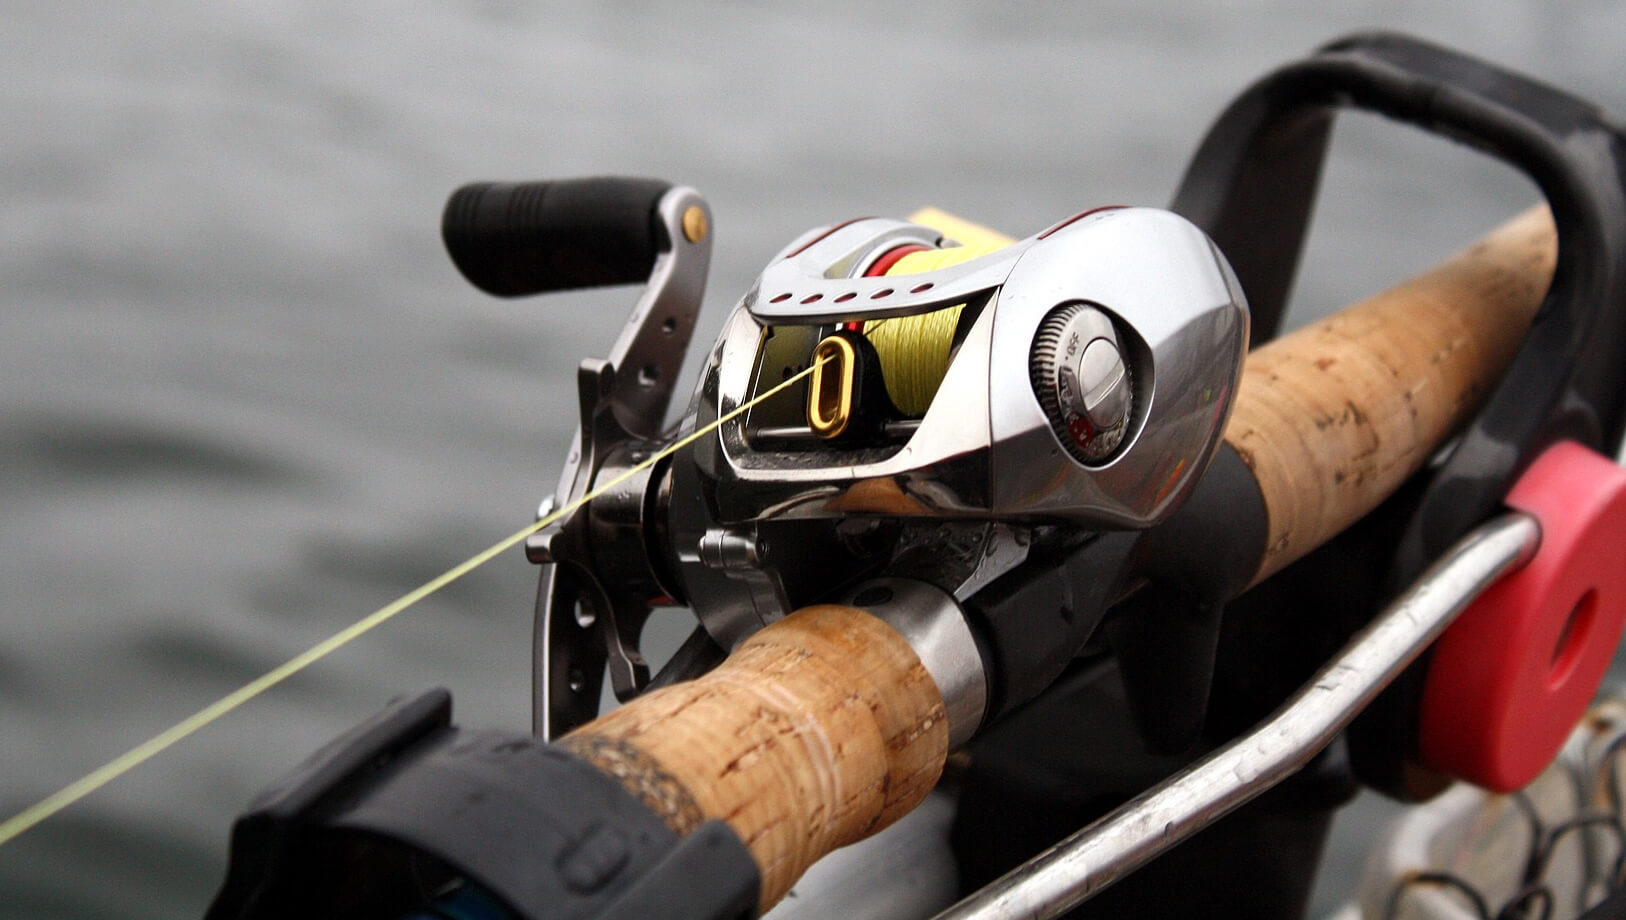 Clutches-for-Baitcasting-Reels